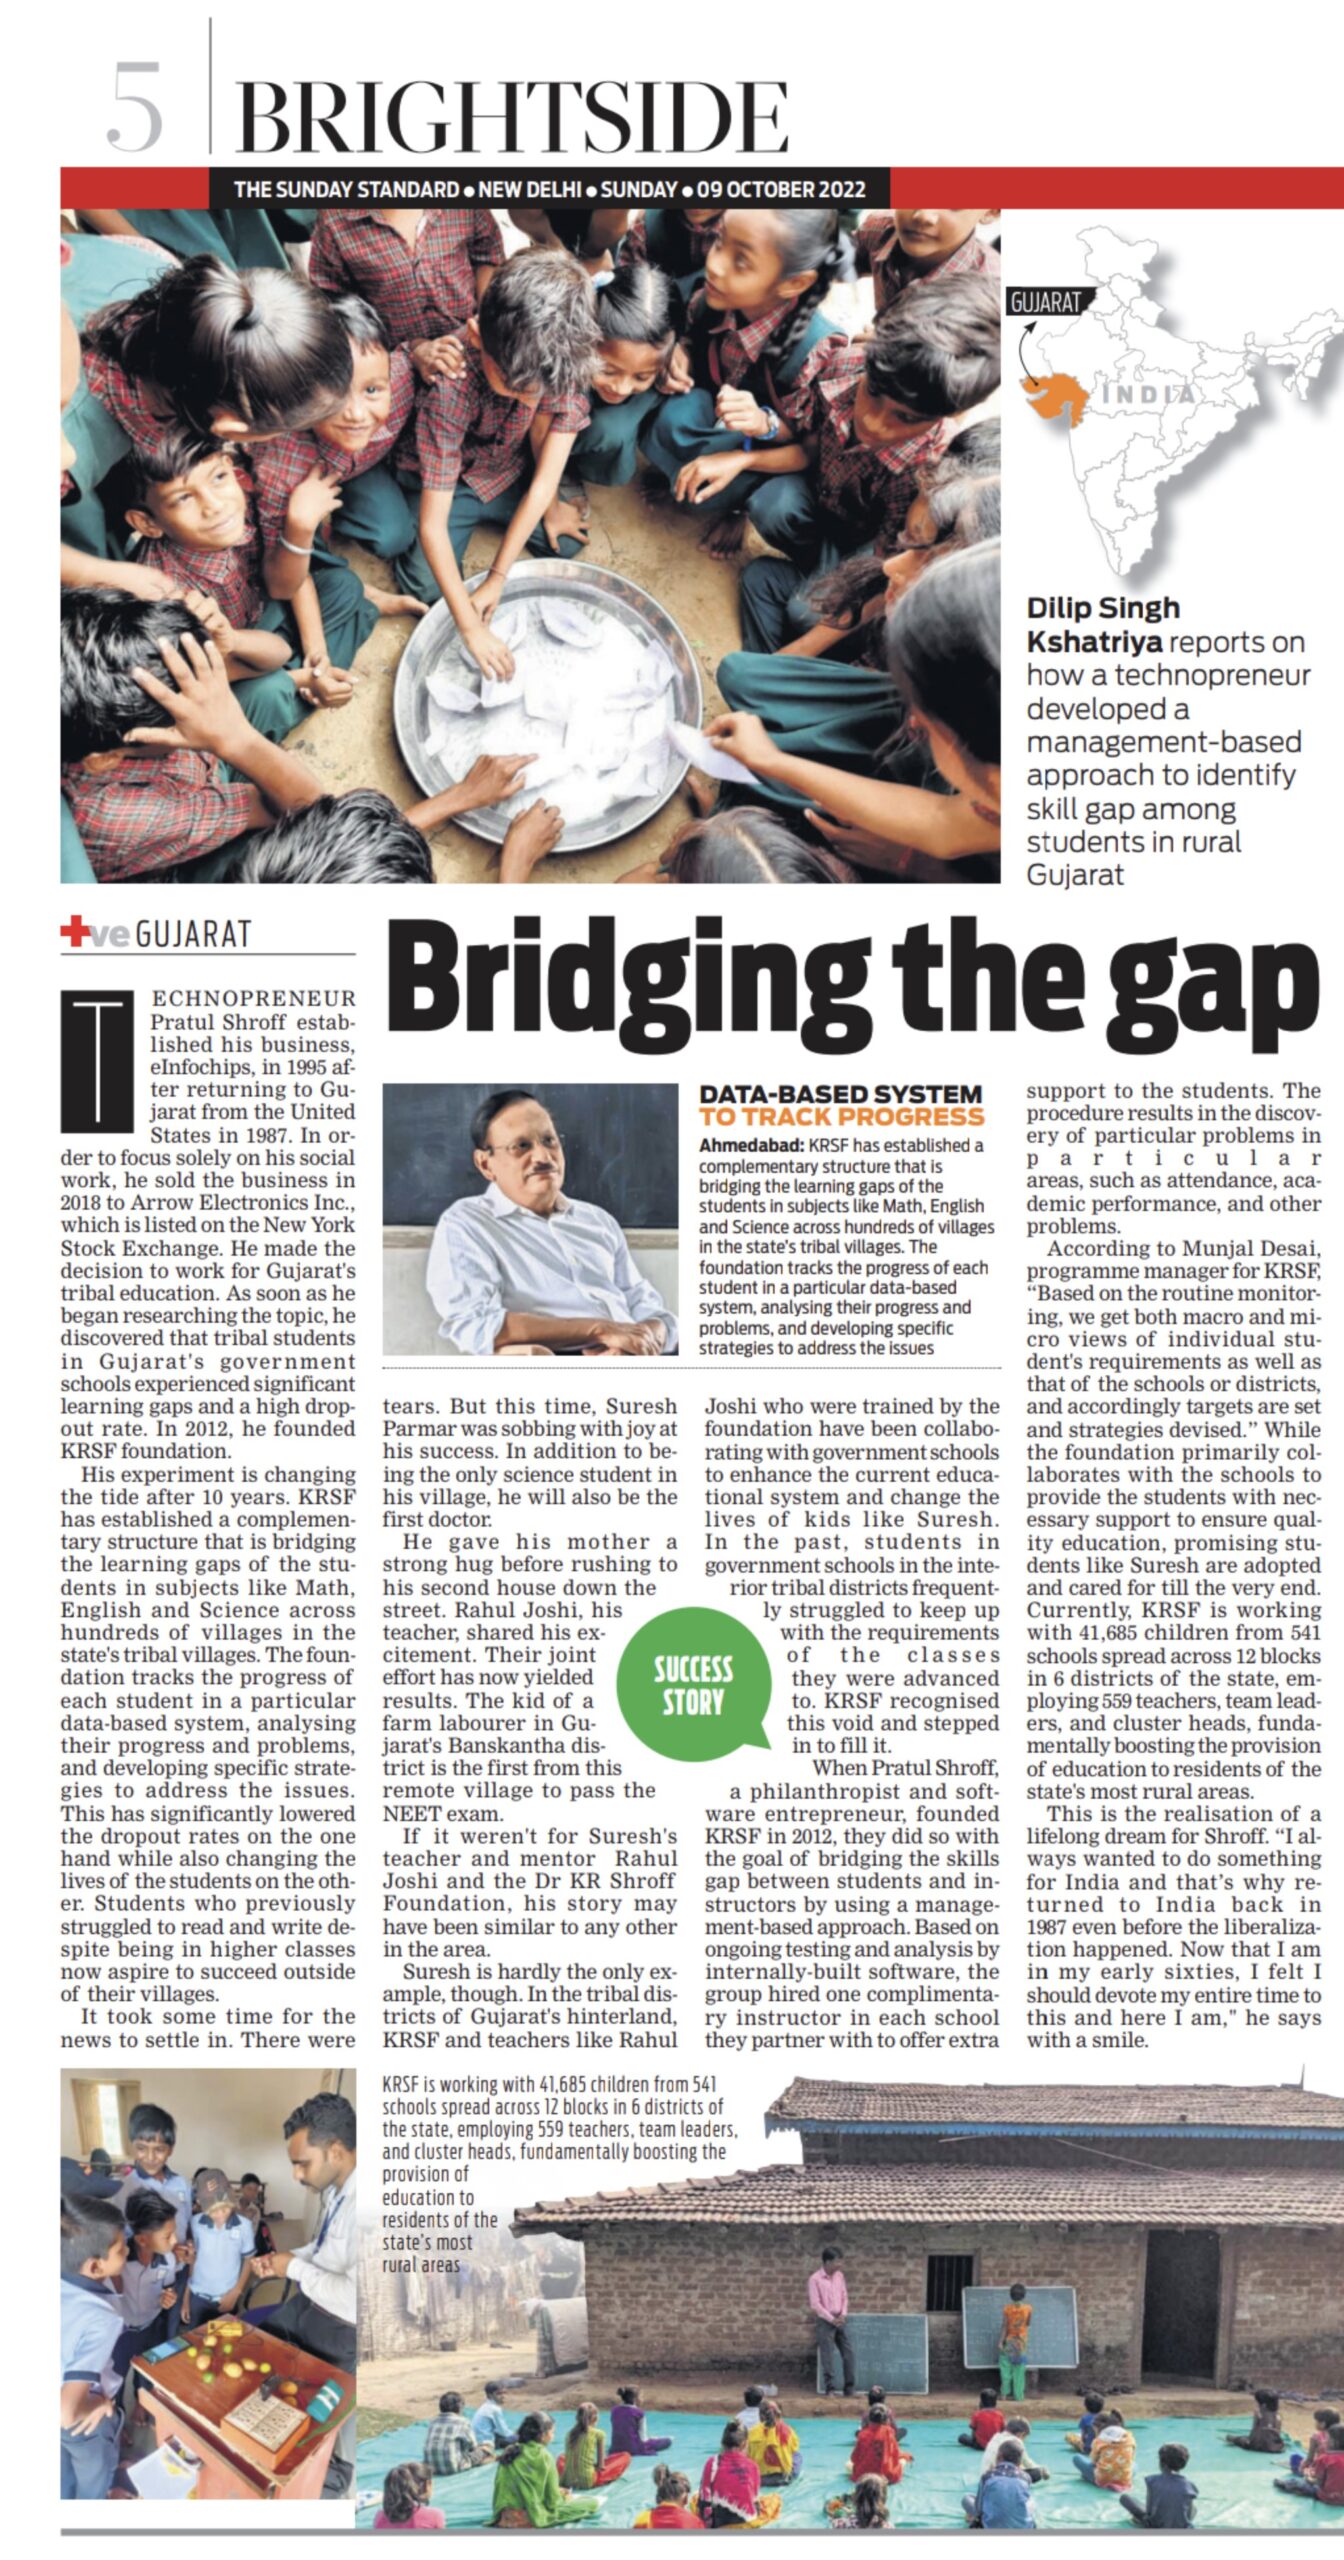 Gujarat’s KRSF foundation is here on a mission to bridge the gap in education of tribal children